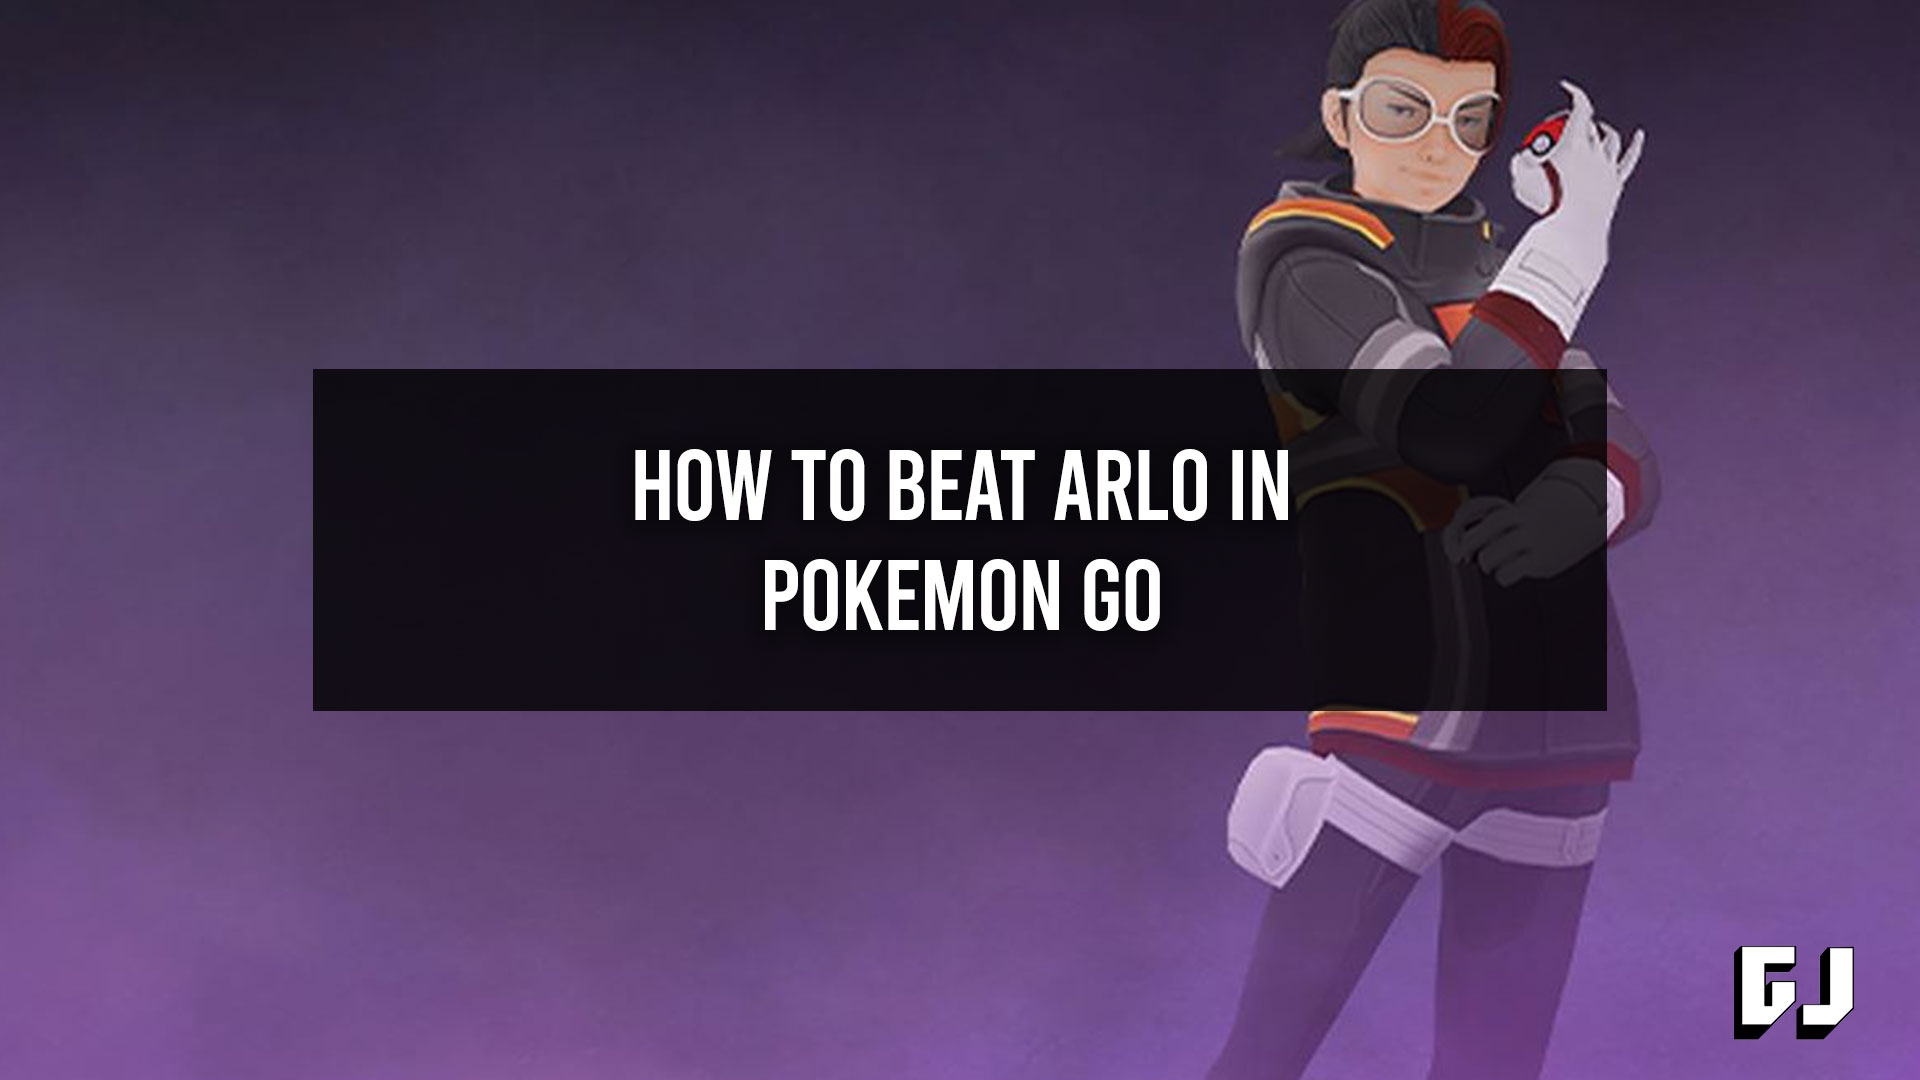 How to beat ARLO in Pokemon Go - February Arlo Counters (Mawile) 